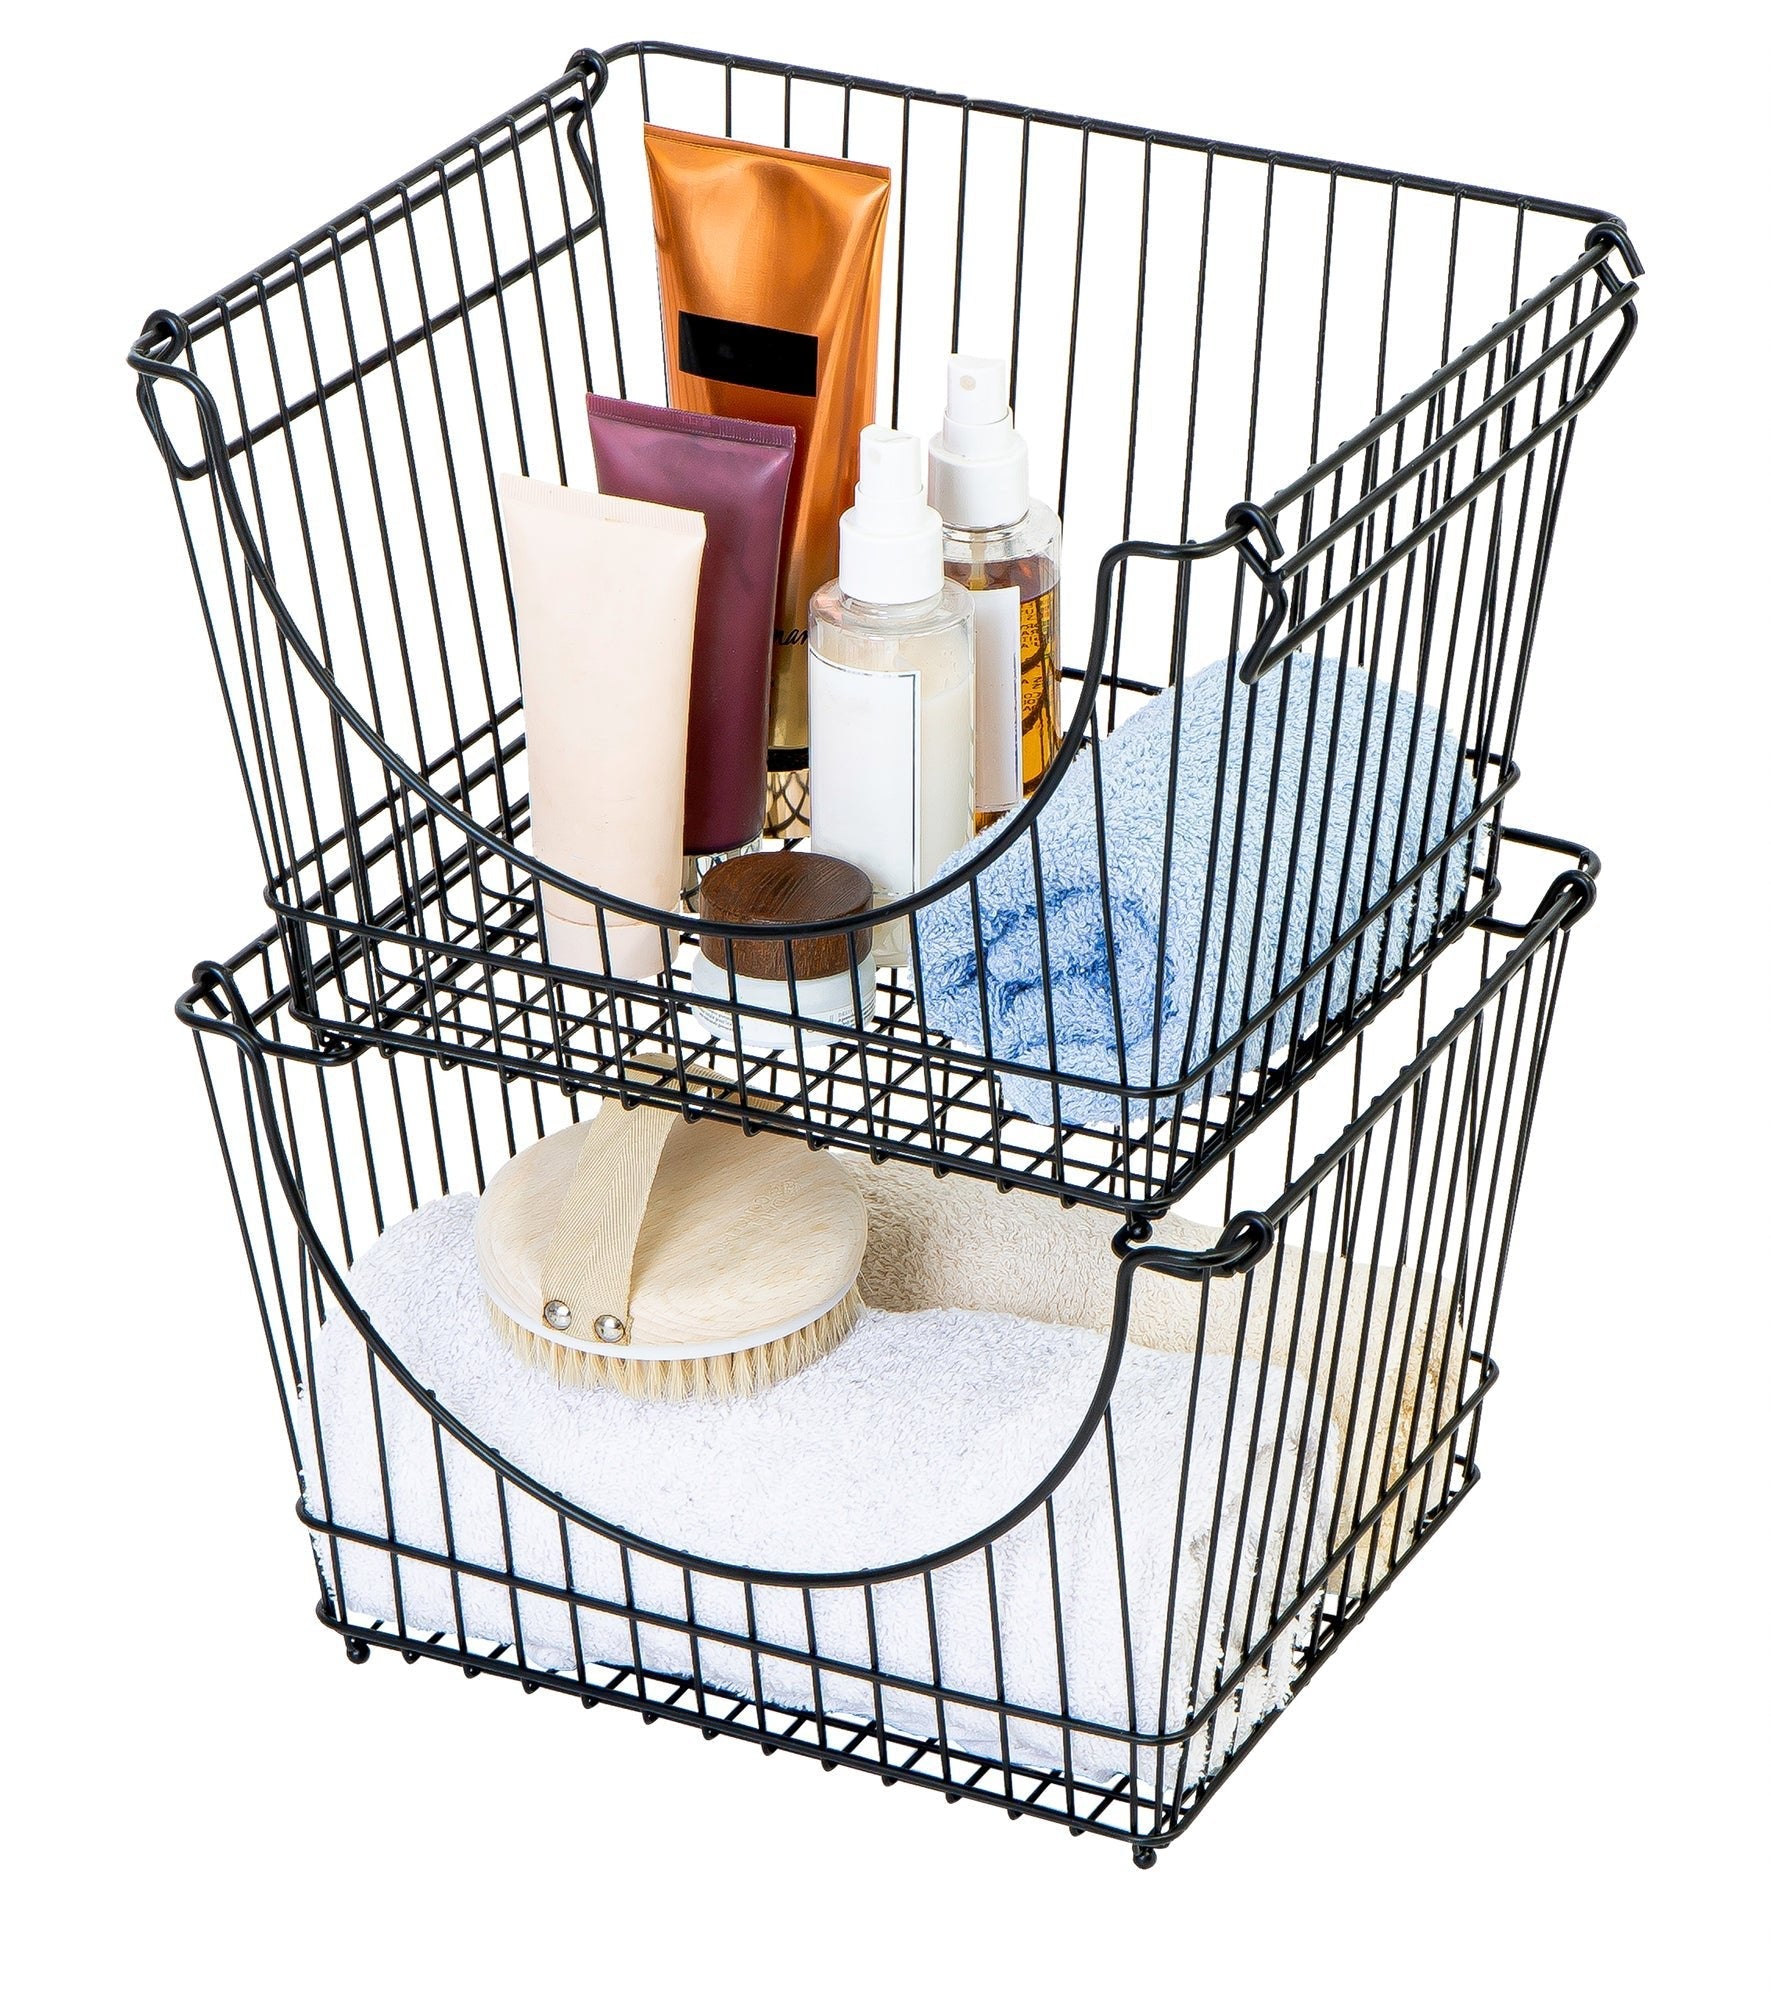 https://cdn.shopify.com/s/files/1/2393/7799/products/large-metal-wire-stacking-baskets-with-handles-smart-design-kitchen-8403128a12-incrementing-number-589618.jpg?v=1681844998